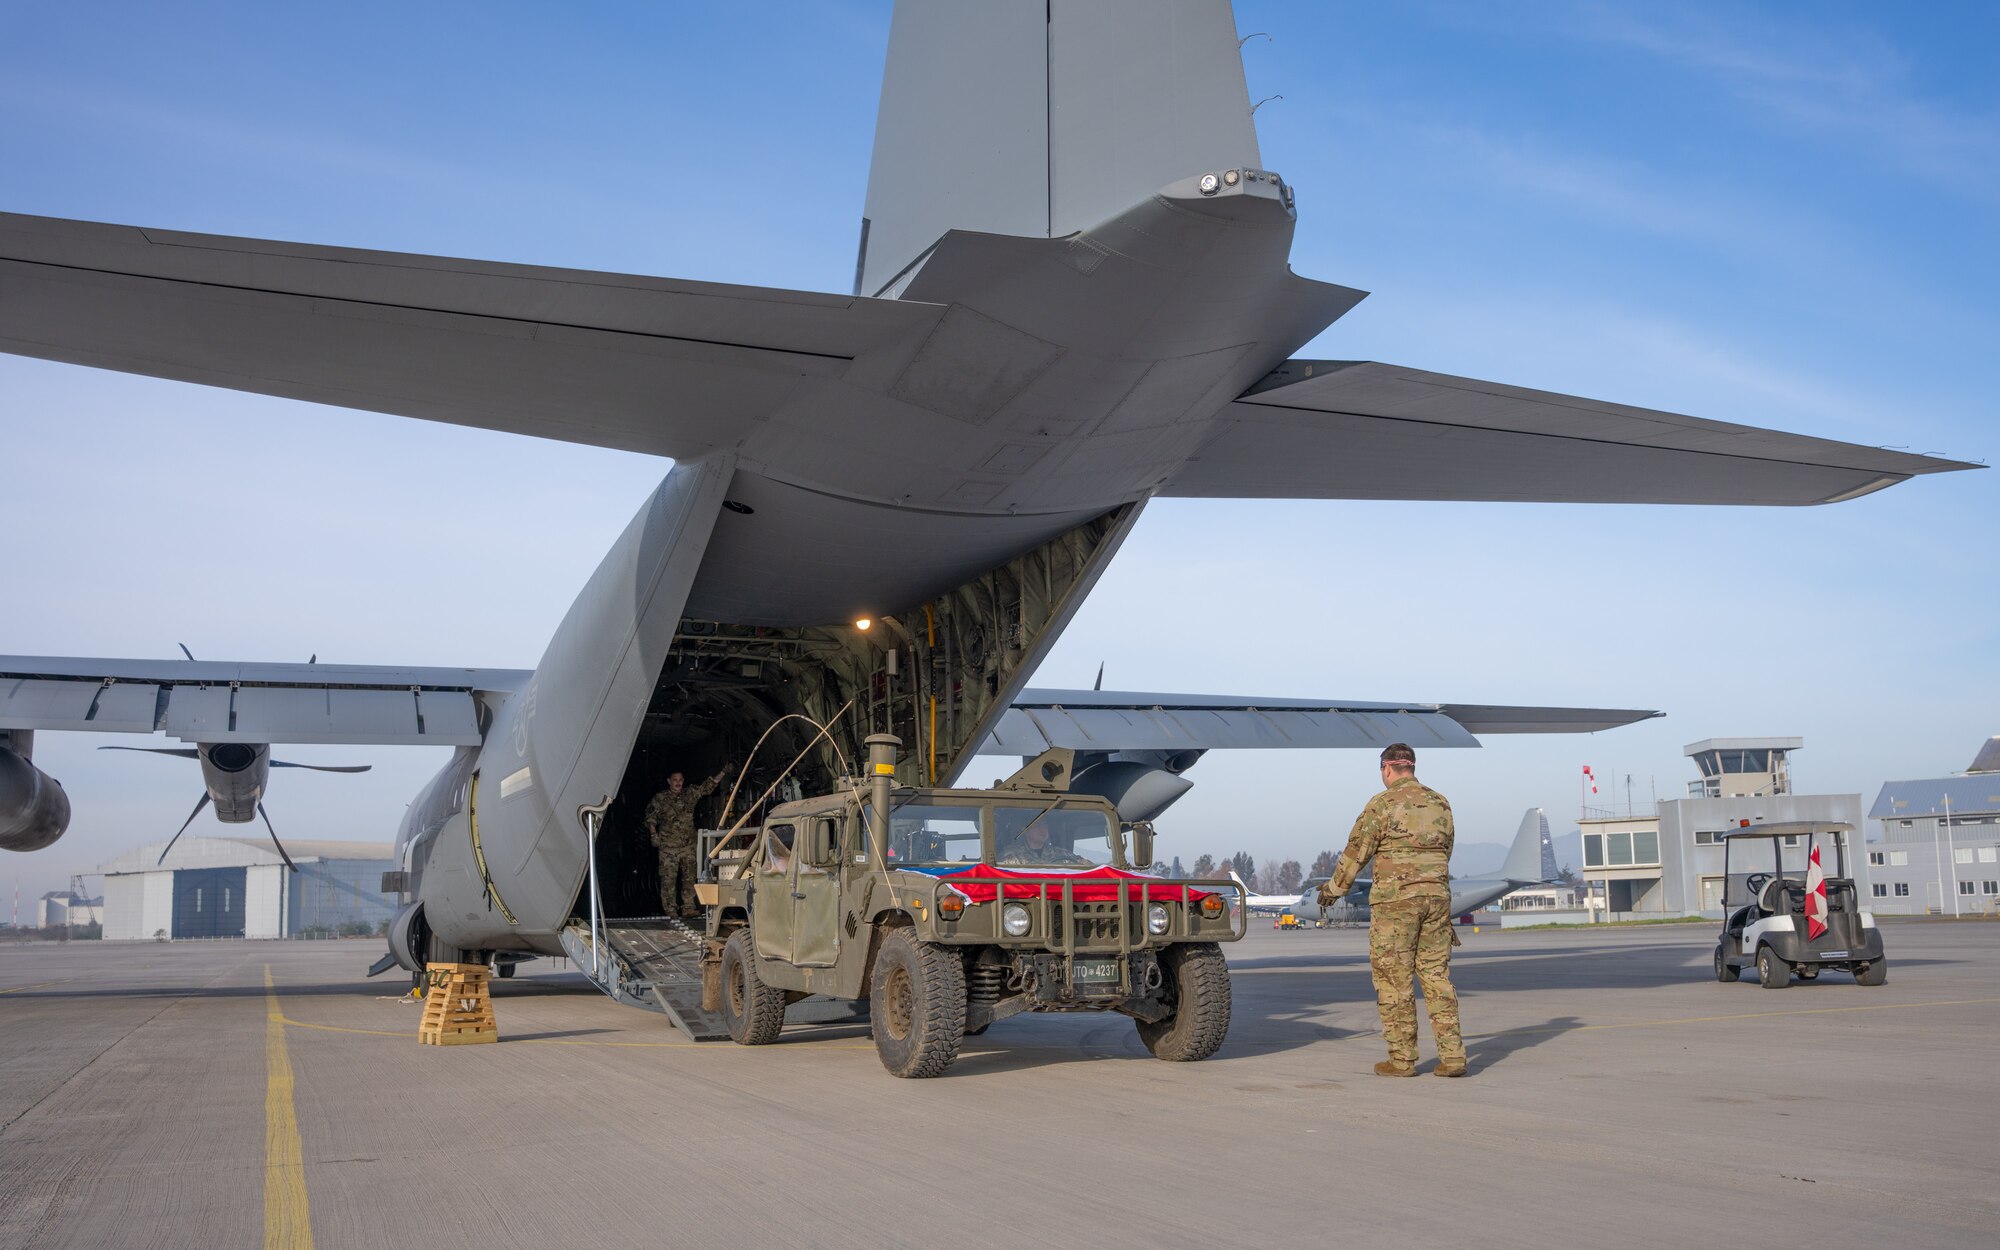 A Chilean Armed Forces Humvee is loaded onto a C-130J Super Hercules from the 39th Airlift Squadron out of the 317th Airlift Wing, Dyess AFB, TX on a runway at the Santiago de Chile Airport, Santiago, Chile, July 28, 2023, during exercise Southern Star 23. Exercise Southern Star 23 is a Chilean-led full-scale Special Operations, Joint, and Combined Employment Exercise. The training consists of staff planning, tactical maneuvers, and collaboration among SOUTHCOM components’ staff, Chilean Armed Forces, and interagency partners during a stabilization scenario which facilitates the opportunity for participants to execute and assess the staff’s ability to plan, coordinate and execute command and control, logistical support, and decision-making processes in a crisis scenario. (U.S. Air Force photo by Staff Sgt. Clayton Wear)